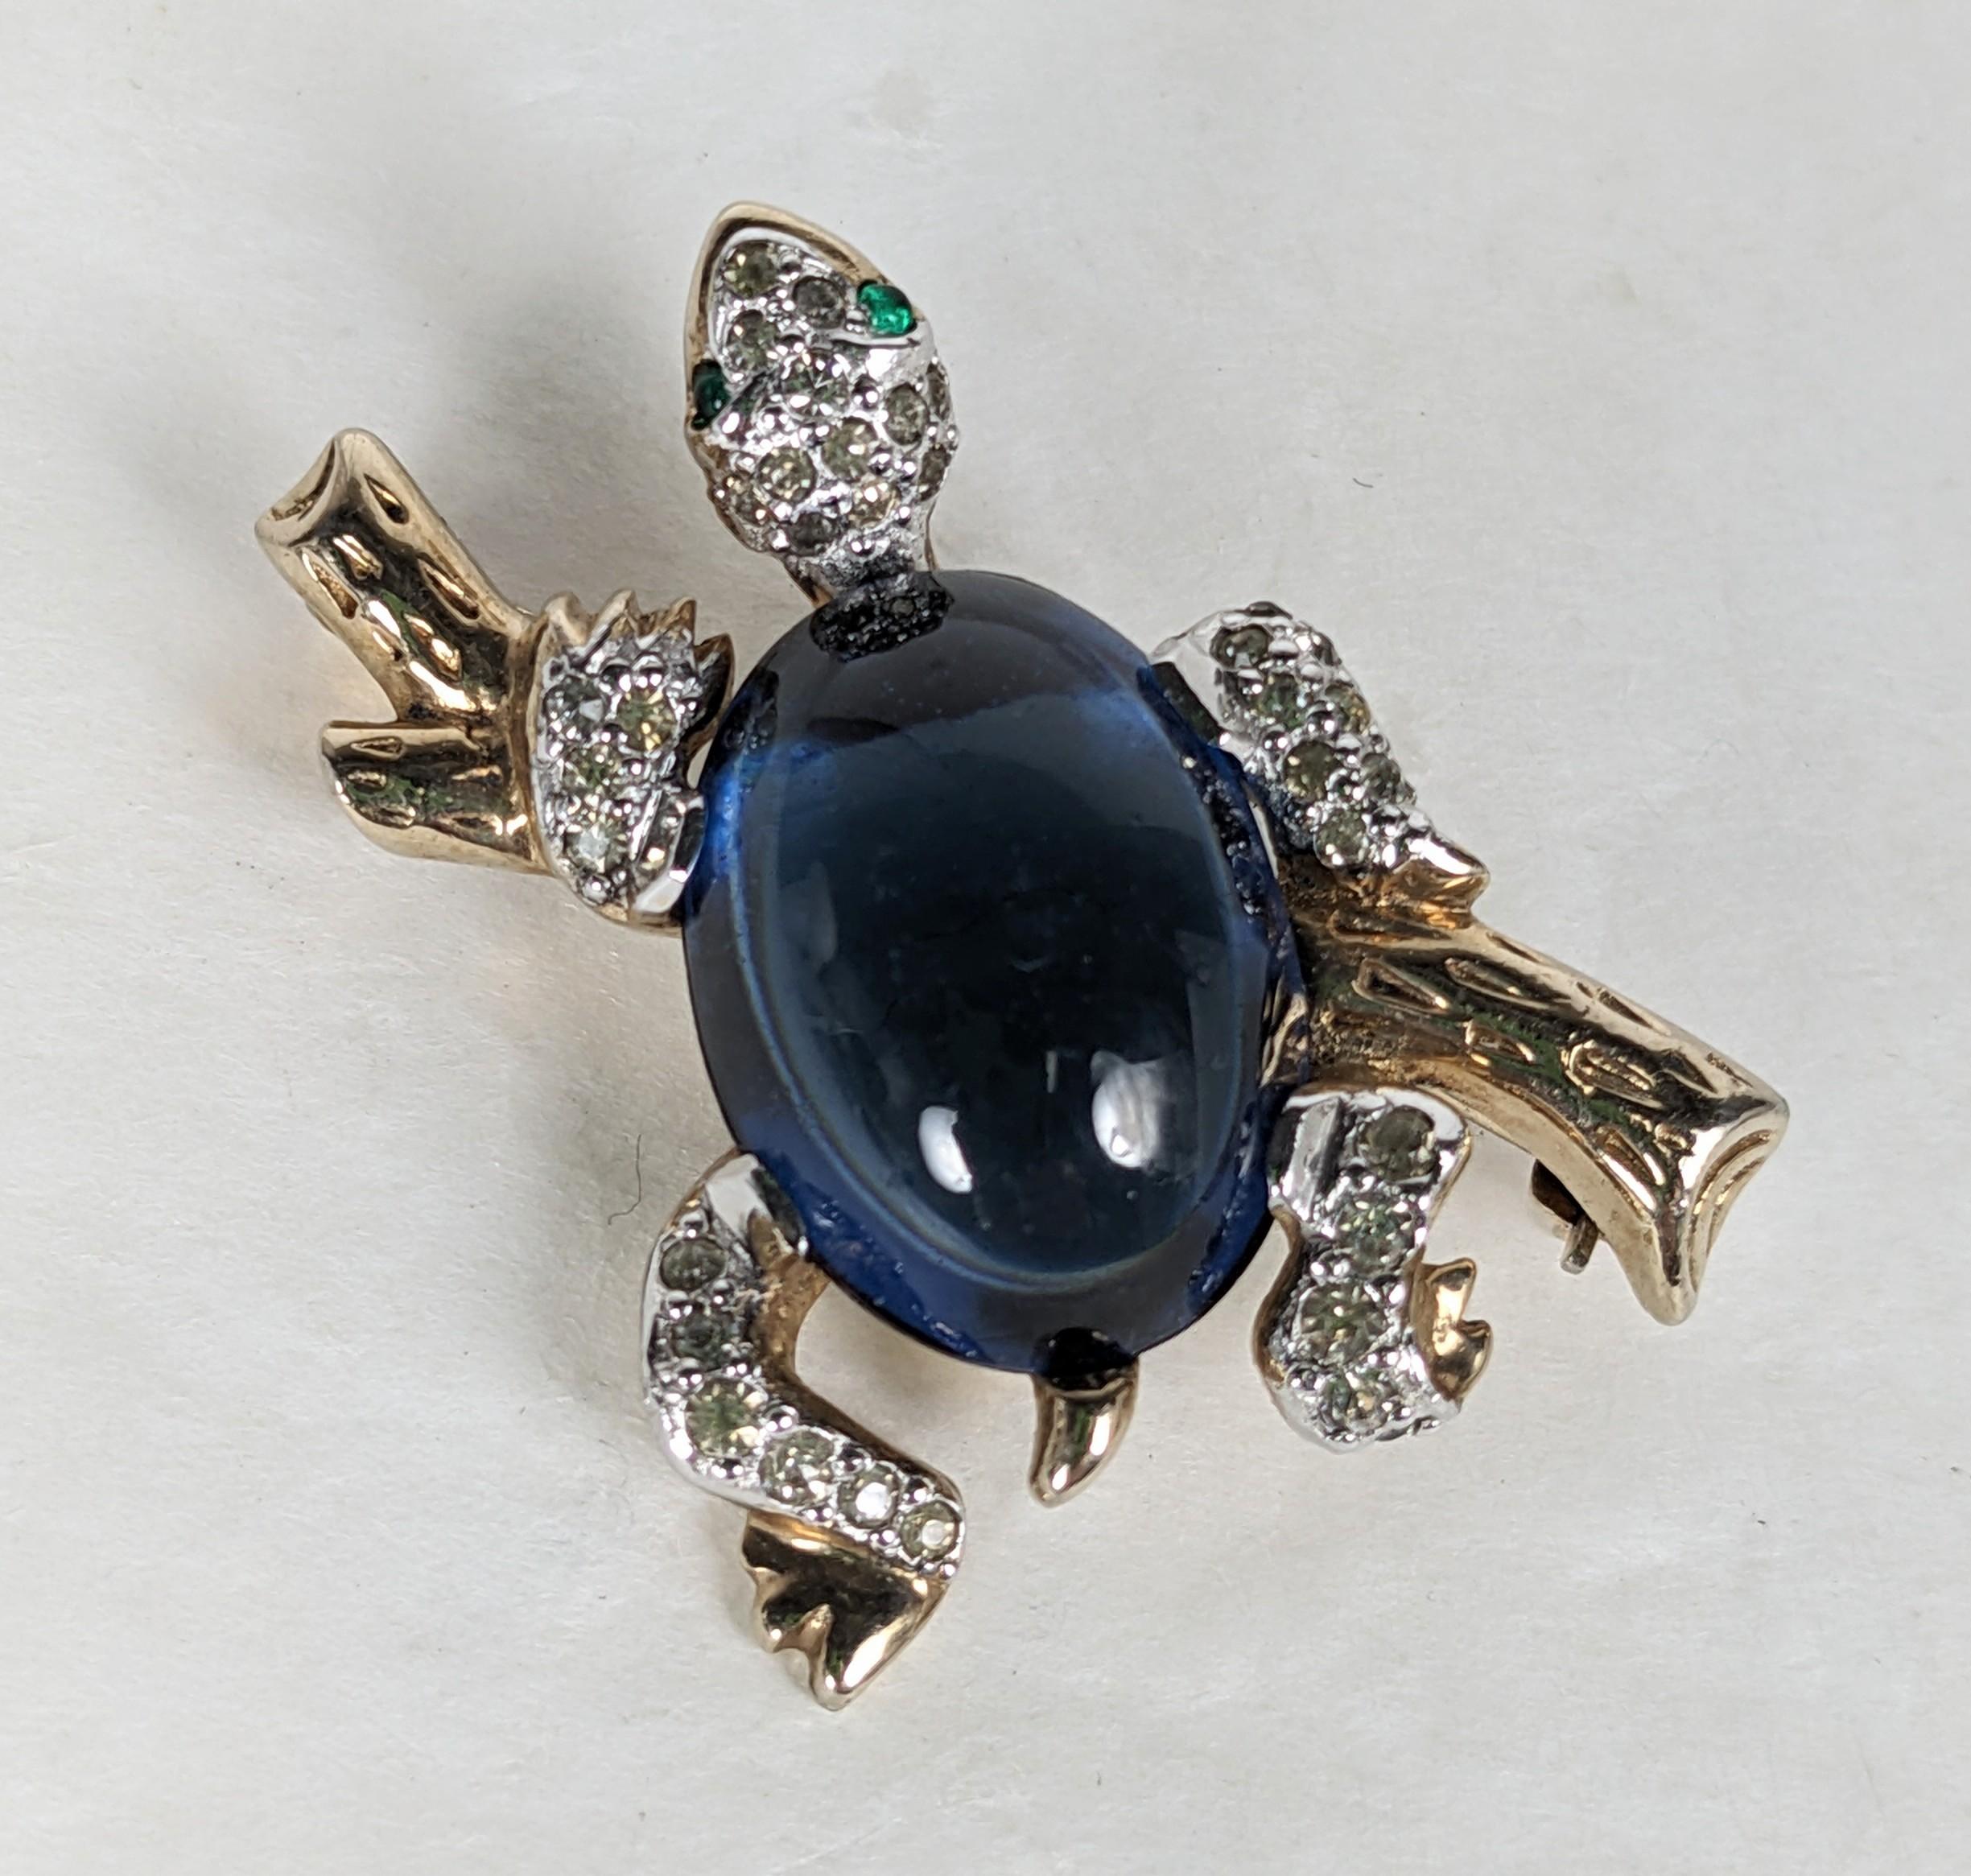 Charming Climbing Turtle Brooch from the 1960's, likely made by Jomaz. High quality faux with large sapphire cab belly with pave accents on a gilt branch. Unmarked. 1960's USA. 1.5